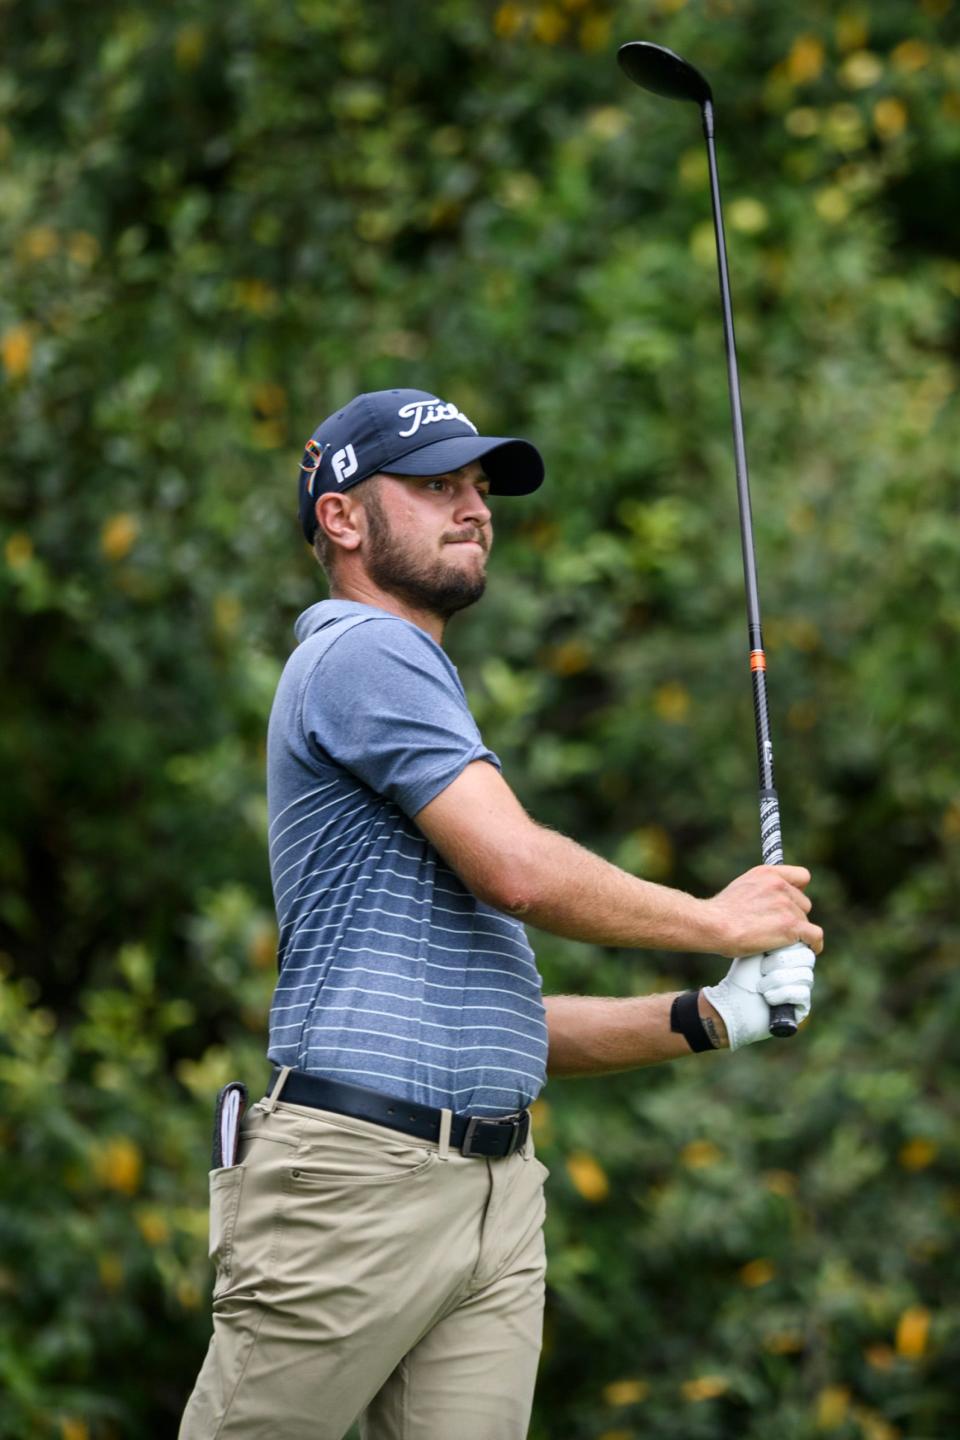 Chandler Blanchet of Atlantic Beach resereved a spot in final stage PGA Tour Q-School by winning the PGA Tour Latinoamerica points series.